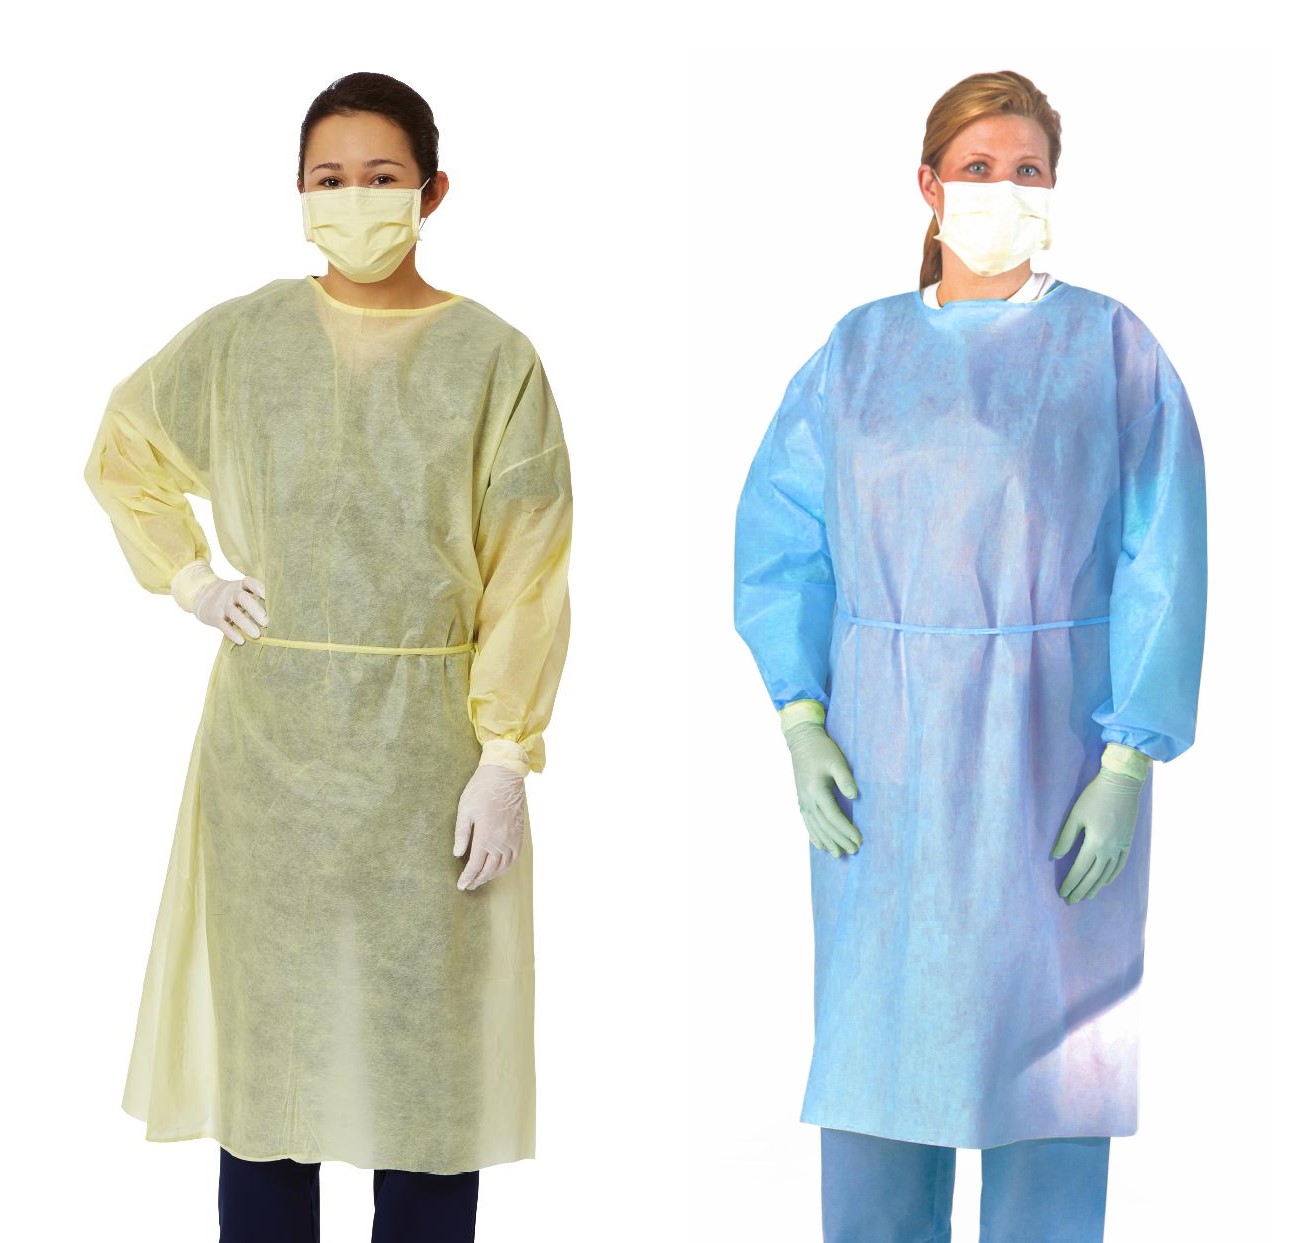 Hospital Isolation Gowns